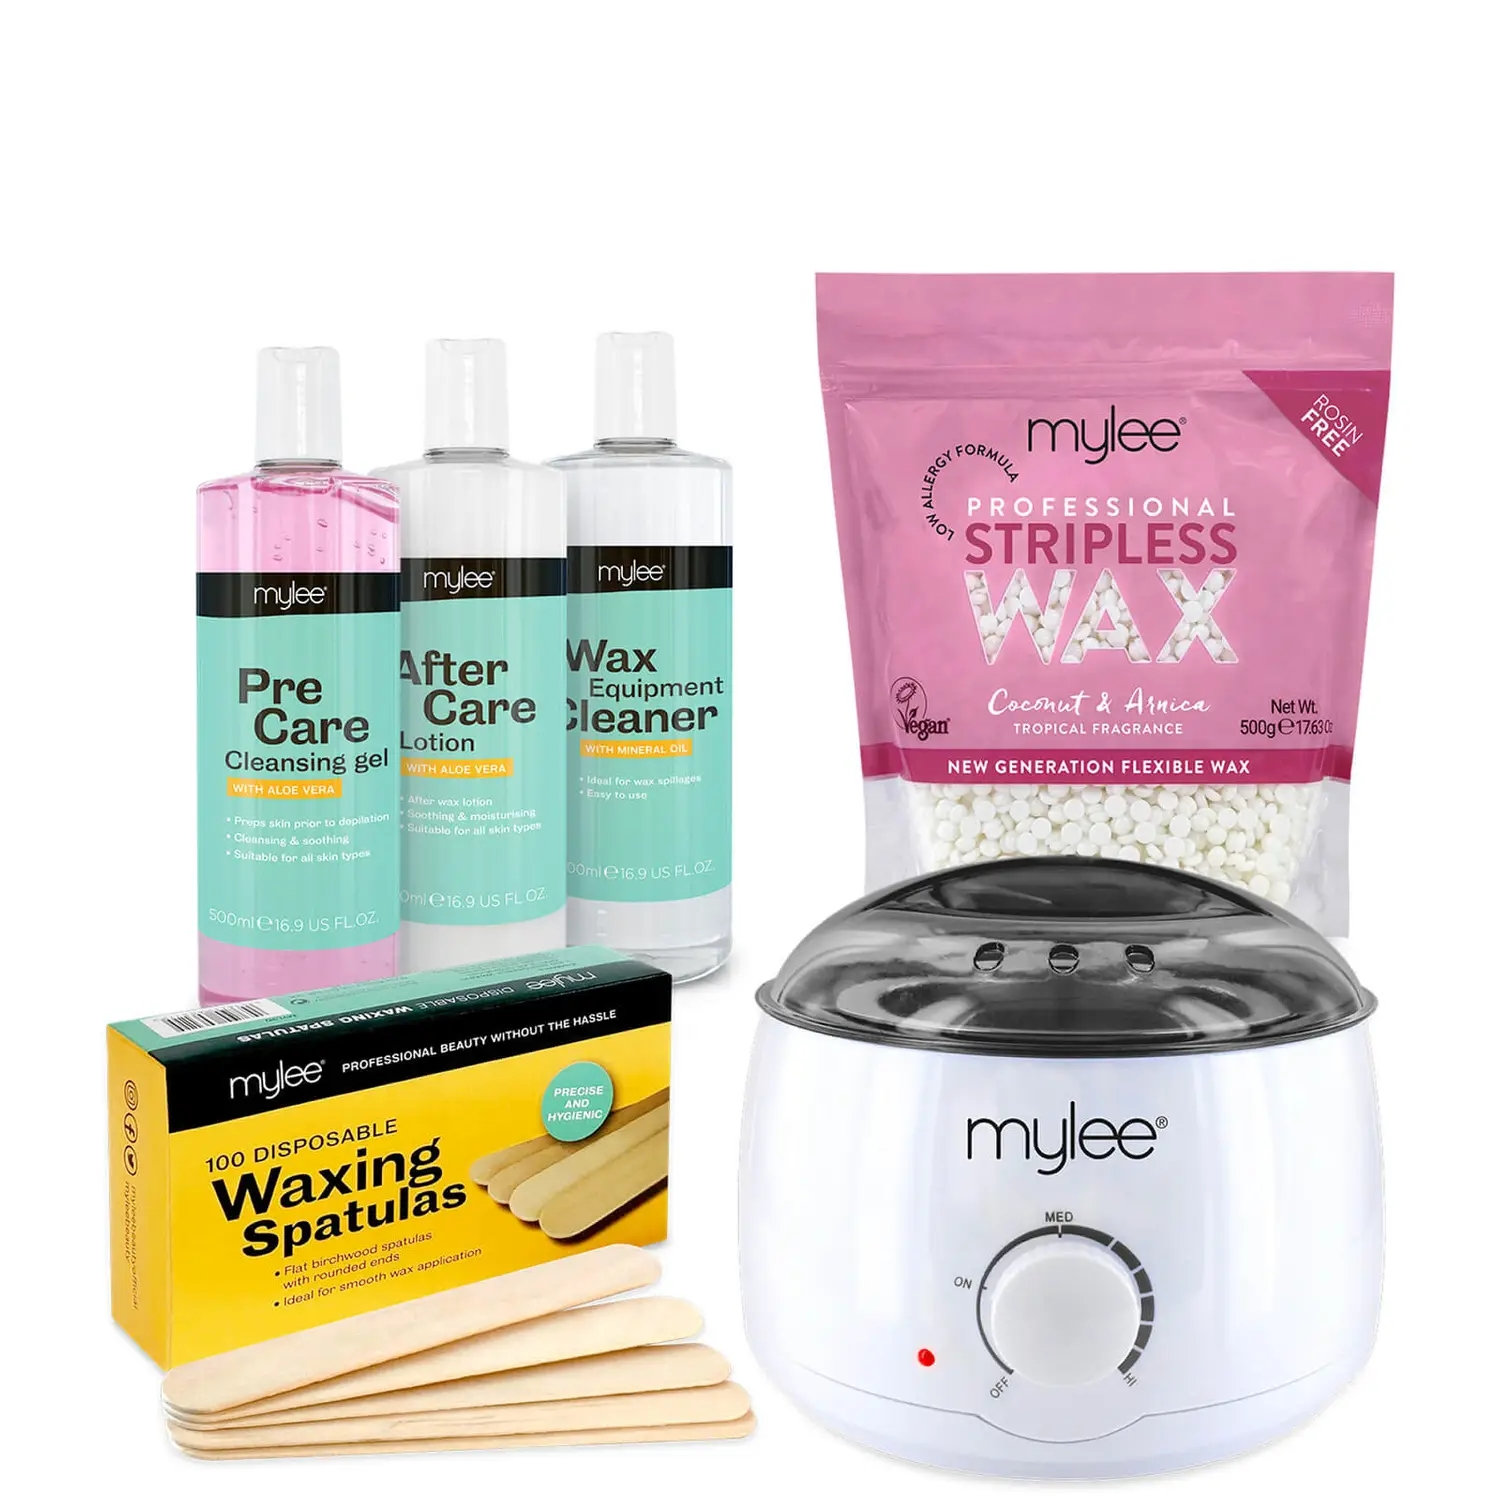 1.Coconut and Arnica Stripless Wax Kit €62.50, 